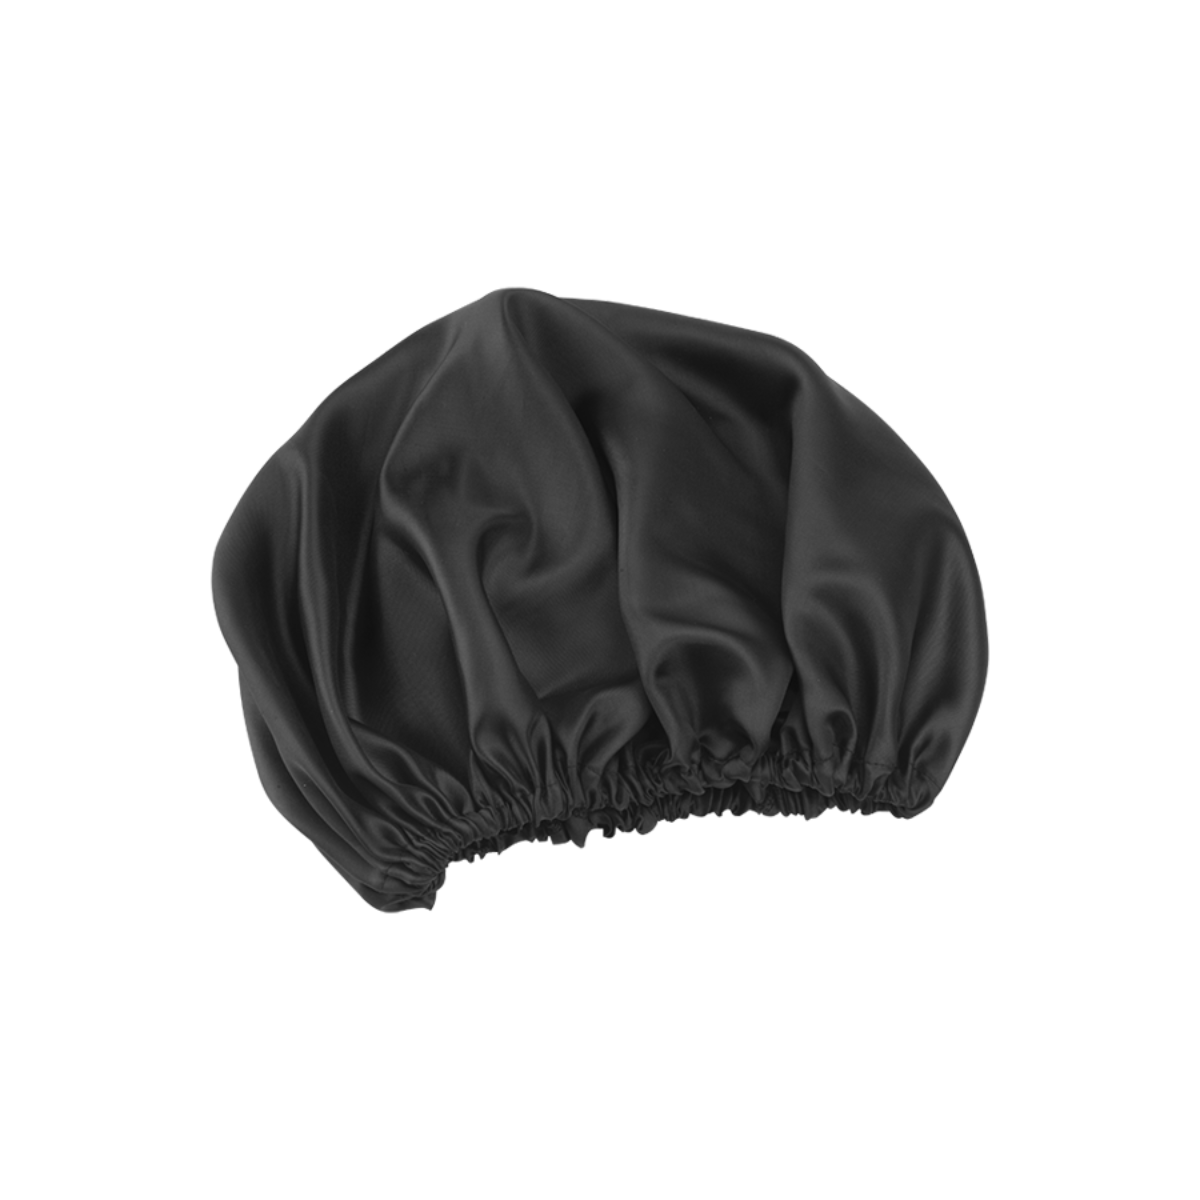 Dompel satin cap for voluminous hair, reduces knots and breakage during sleep, Model 392